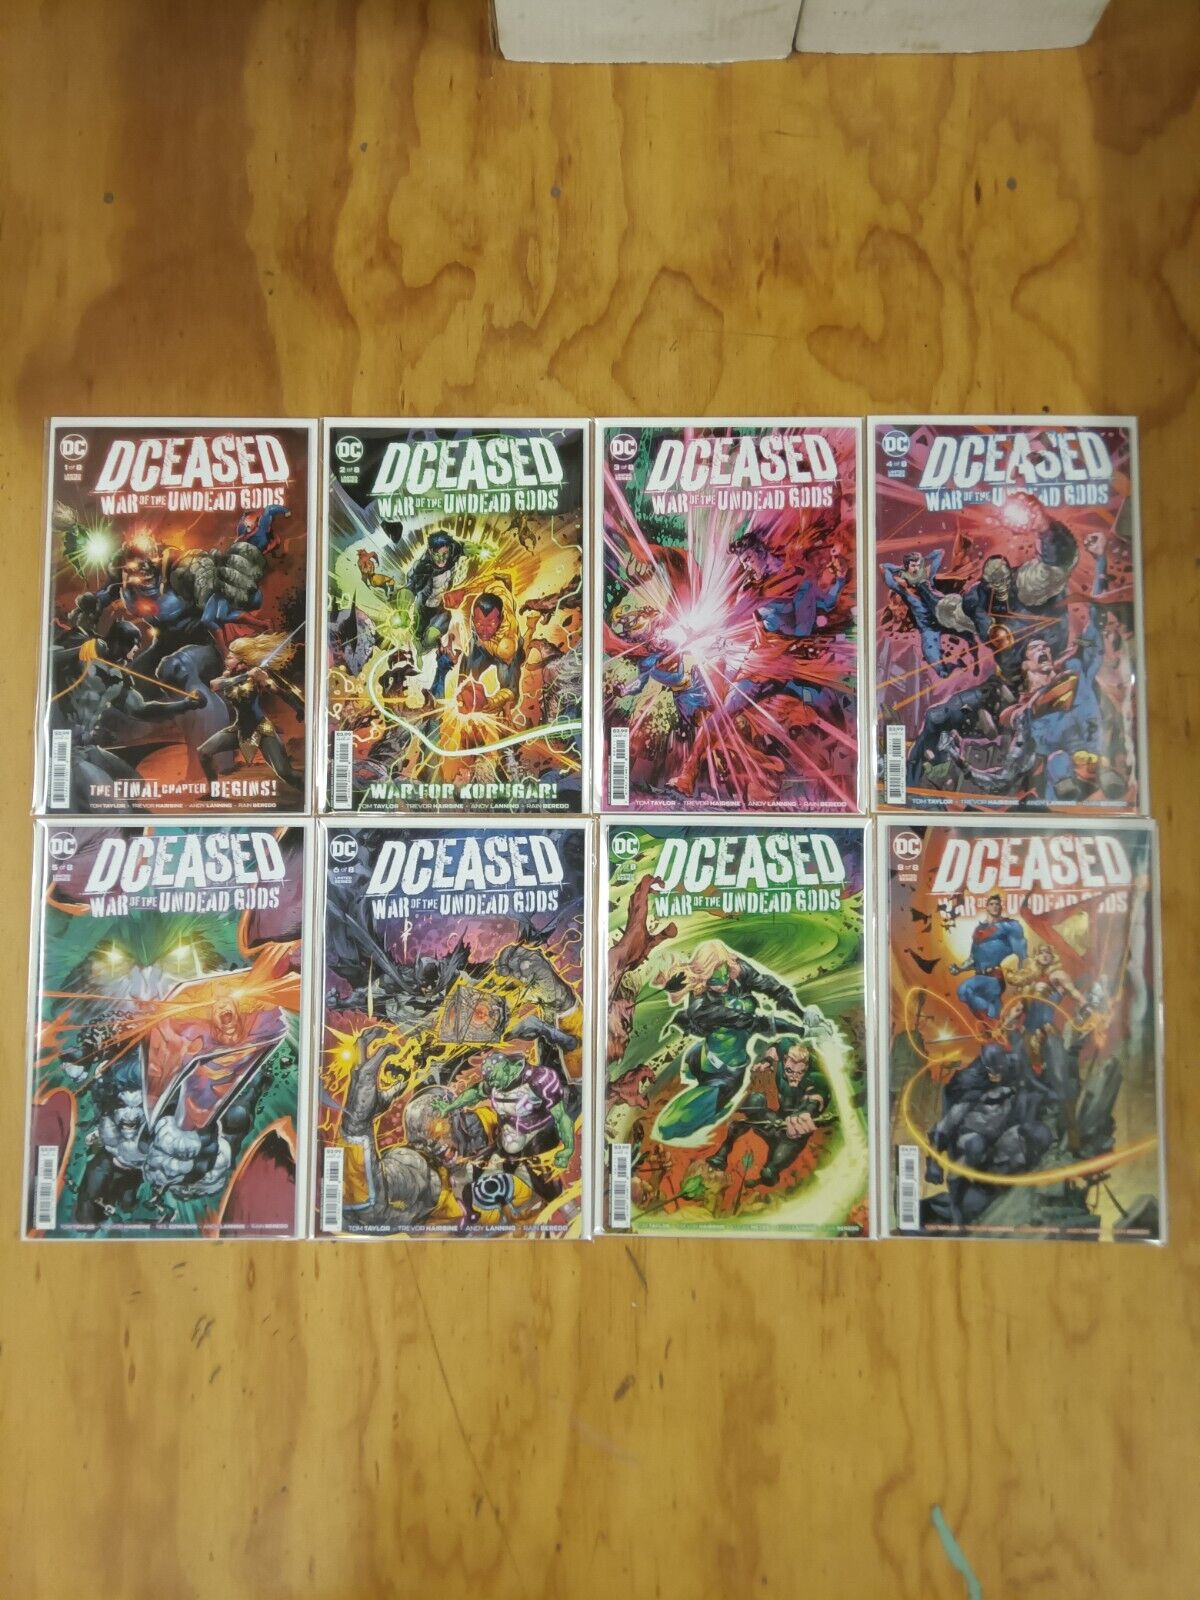 DCeased War of the Undead Gods 1-8 Complete Comic Set DC Collection